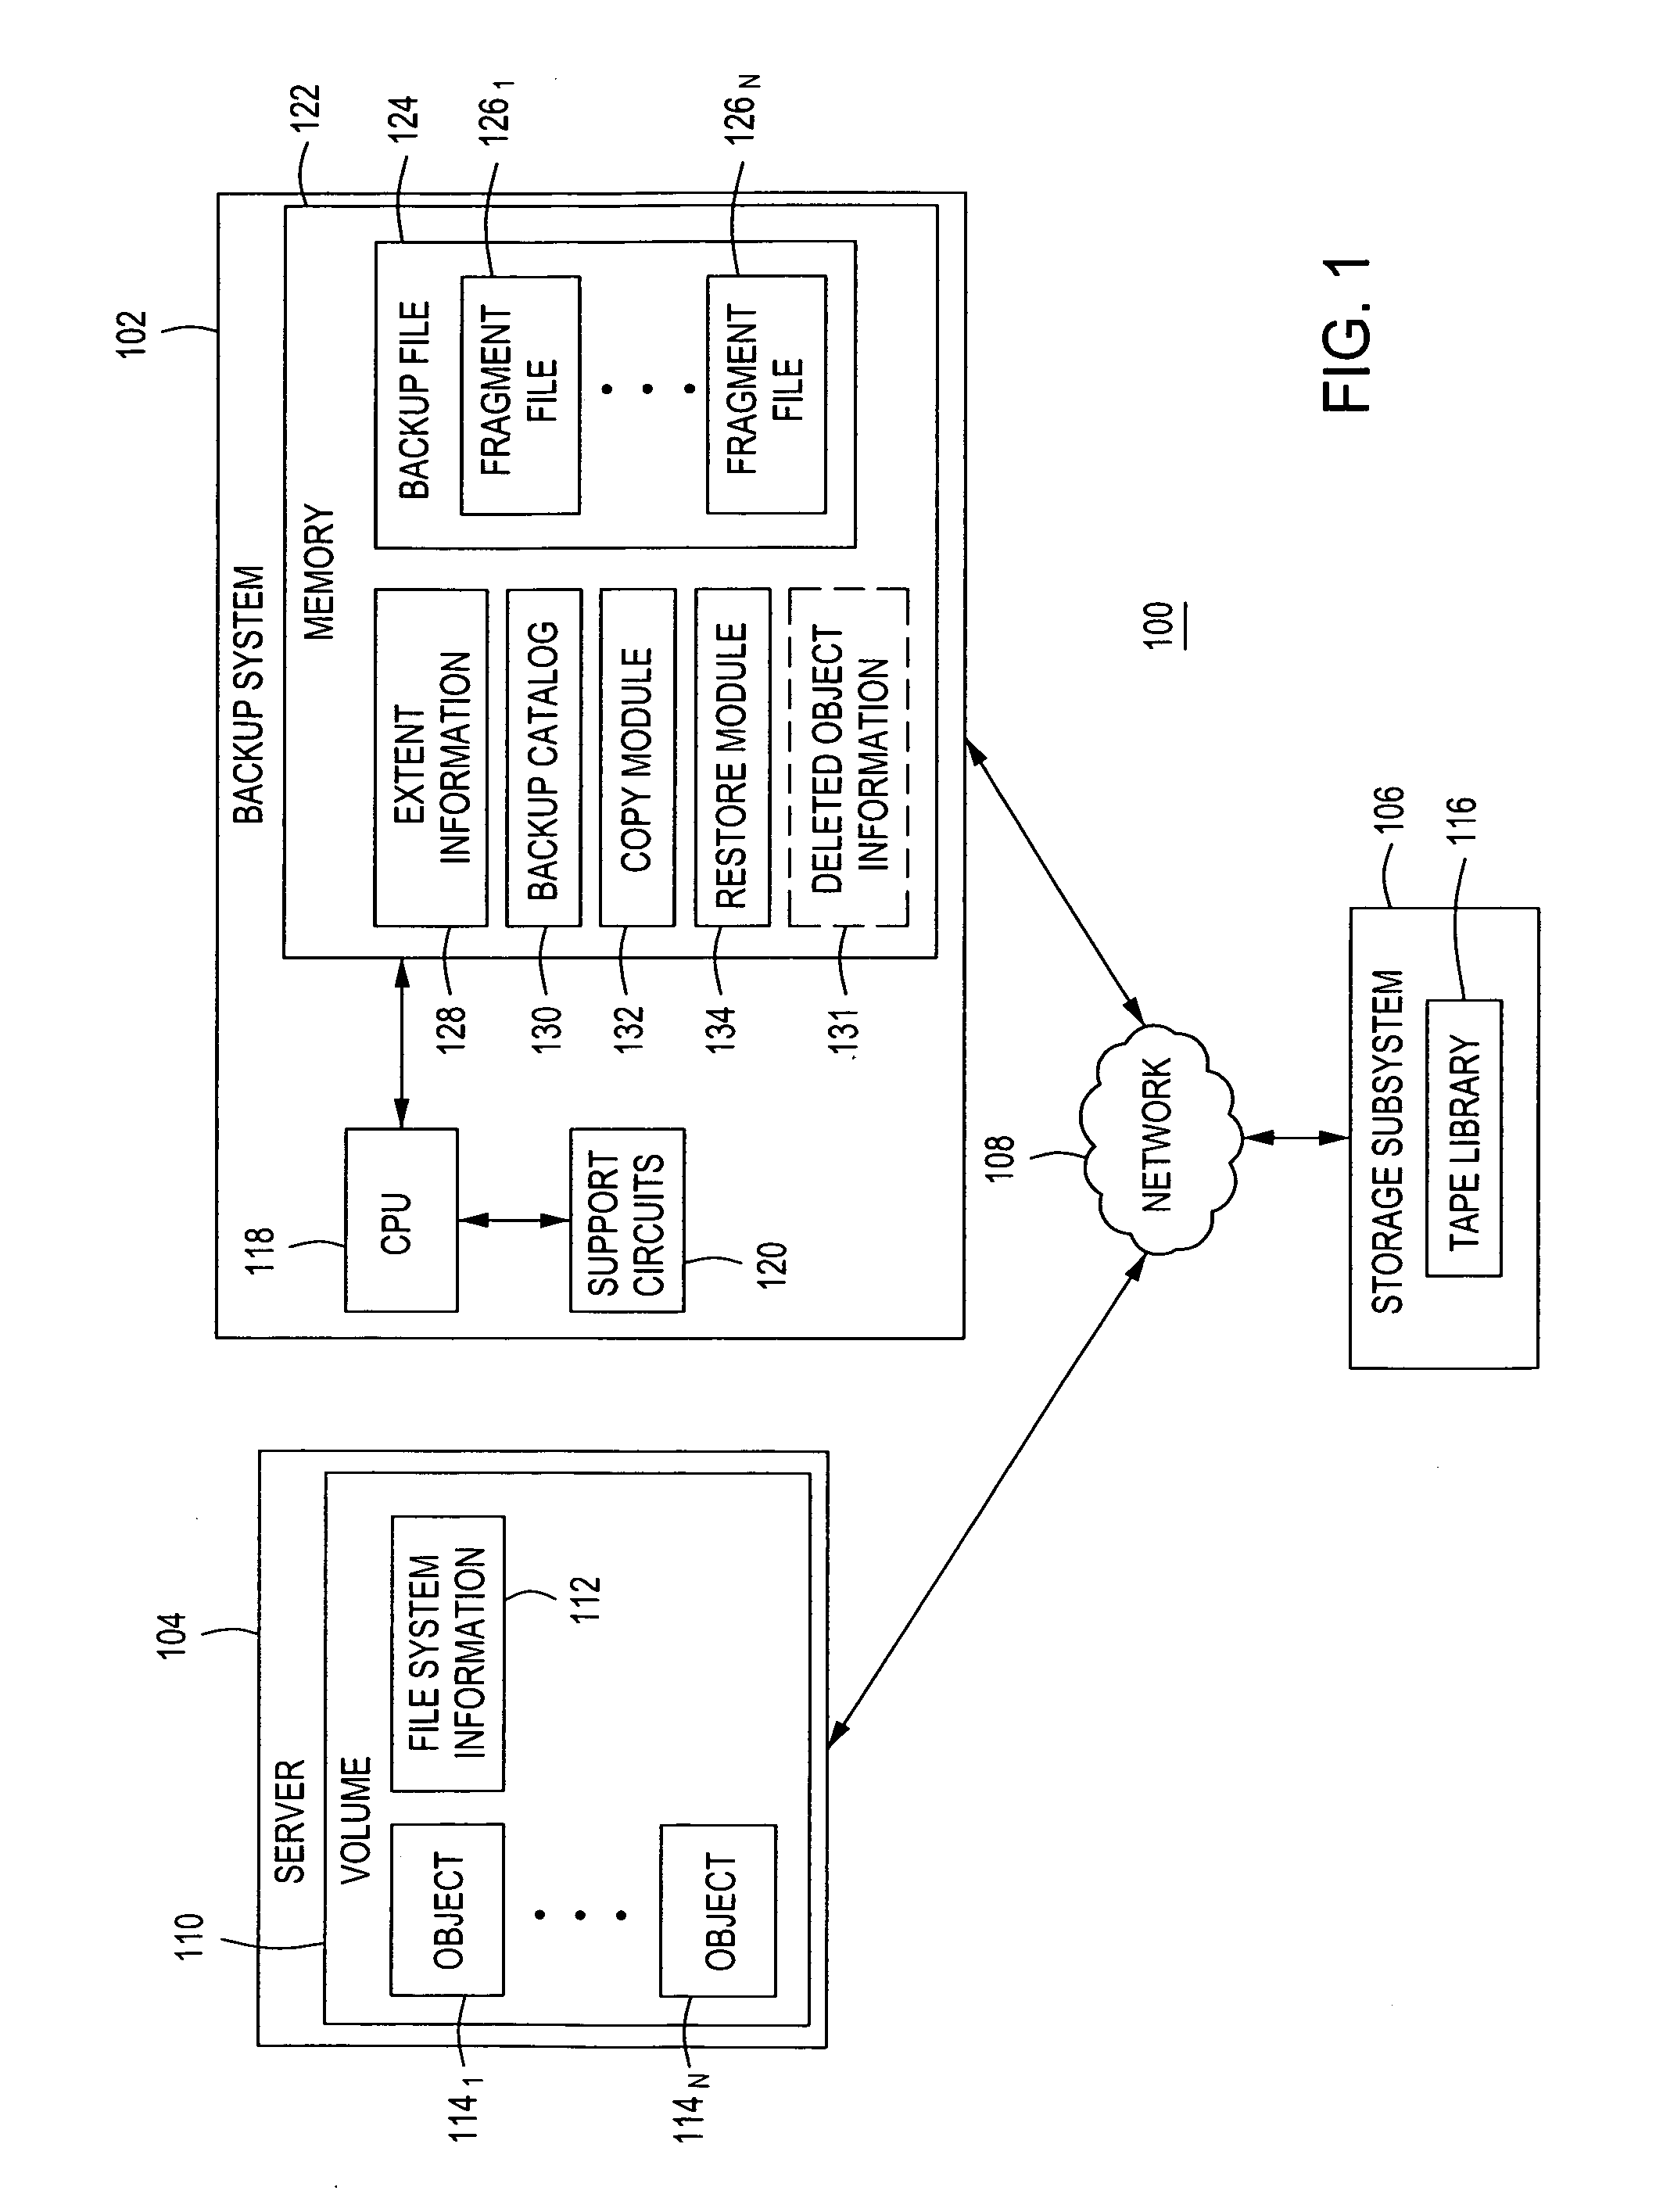 Method and apparatus for performing file-level restoration from a block-based backup file stored on a sequential storage device